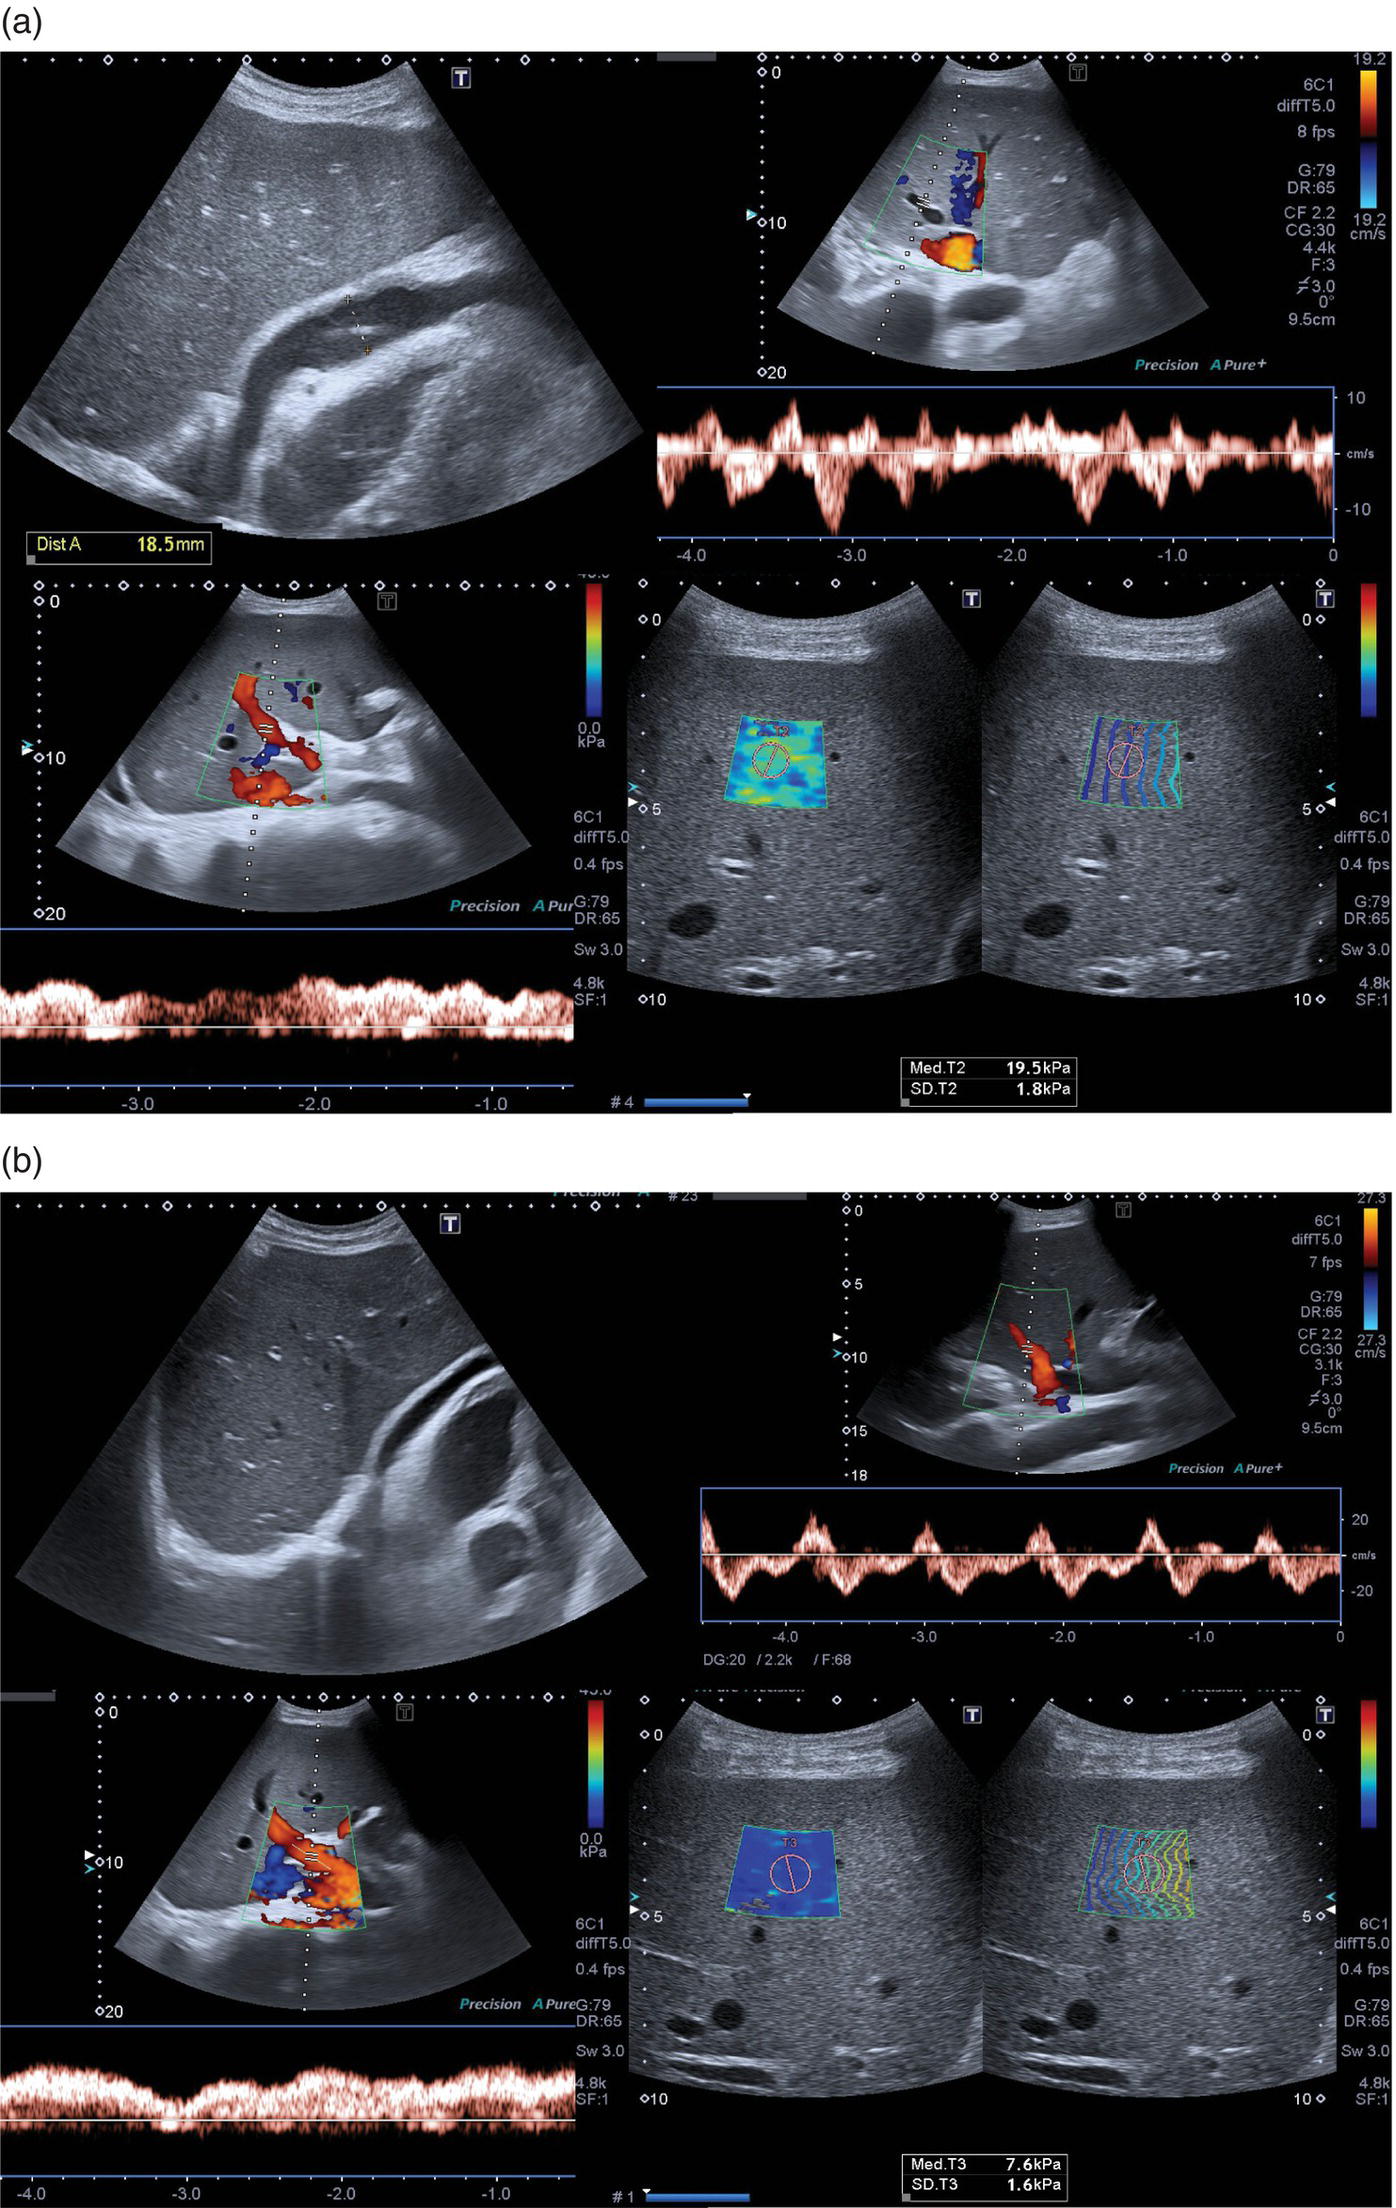 Two sets of ultrasound scan images of a patient with polyserositis complicated by pericardial effusion and severe hypotension. (a) The scan images show hepatic congestion secondary to dynamic cardiac outflow obstruction with pulsatile portal venous flow and deranged spectral waveform of the hepatic veins. (b) After large-volume fluid infusion and anti-inflammatory treatment, there was significant reduction of the pericardial effusion.